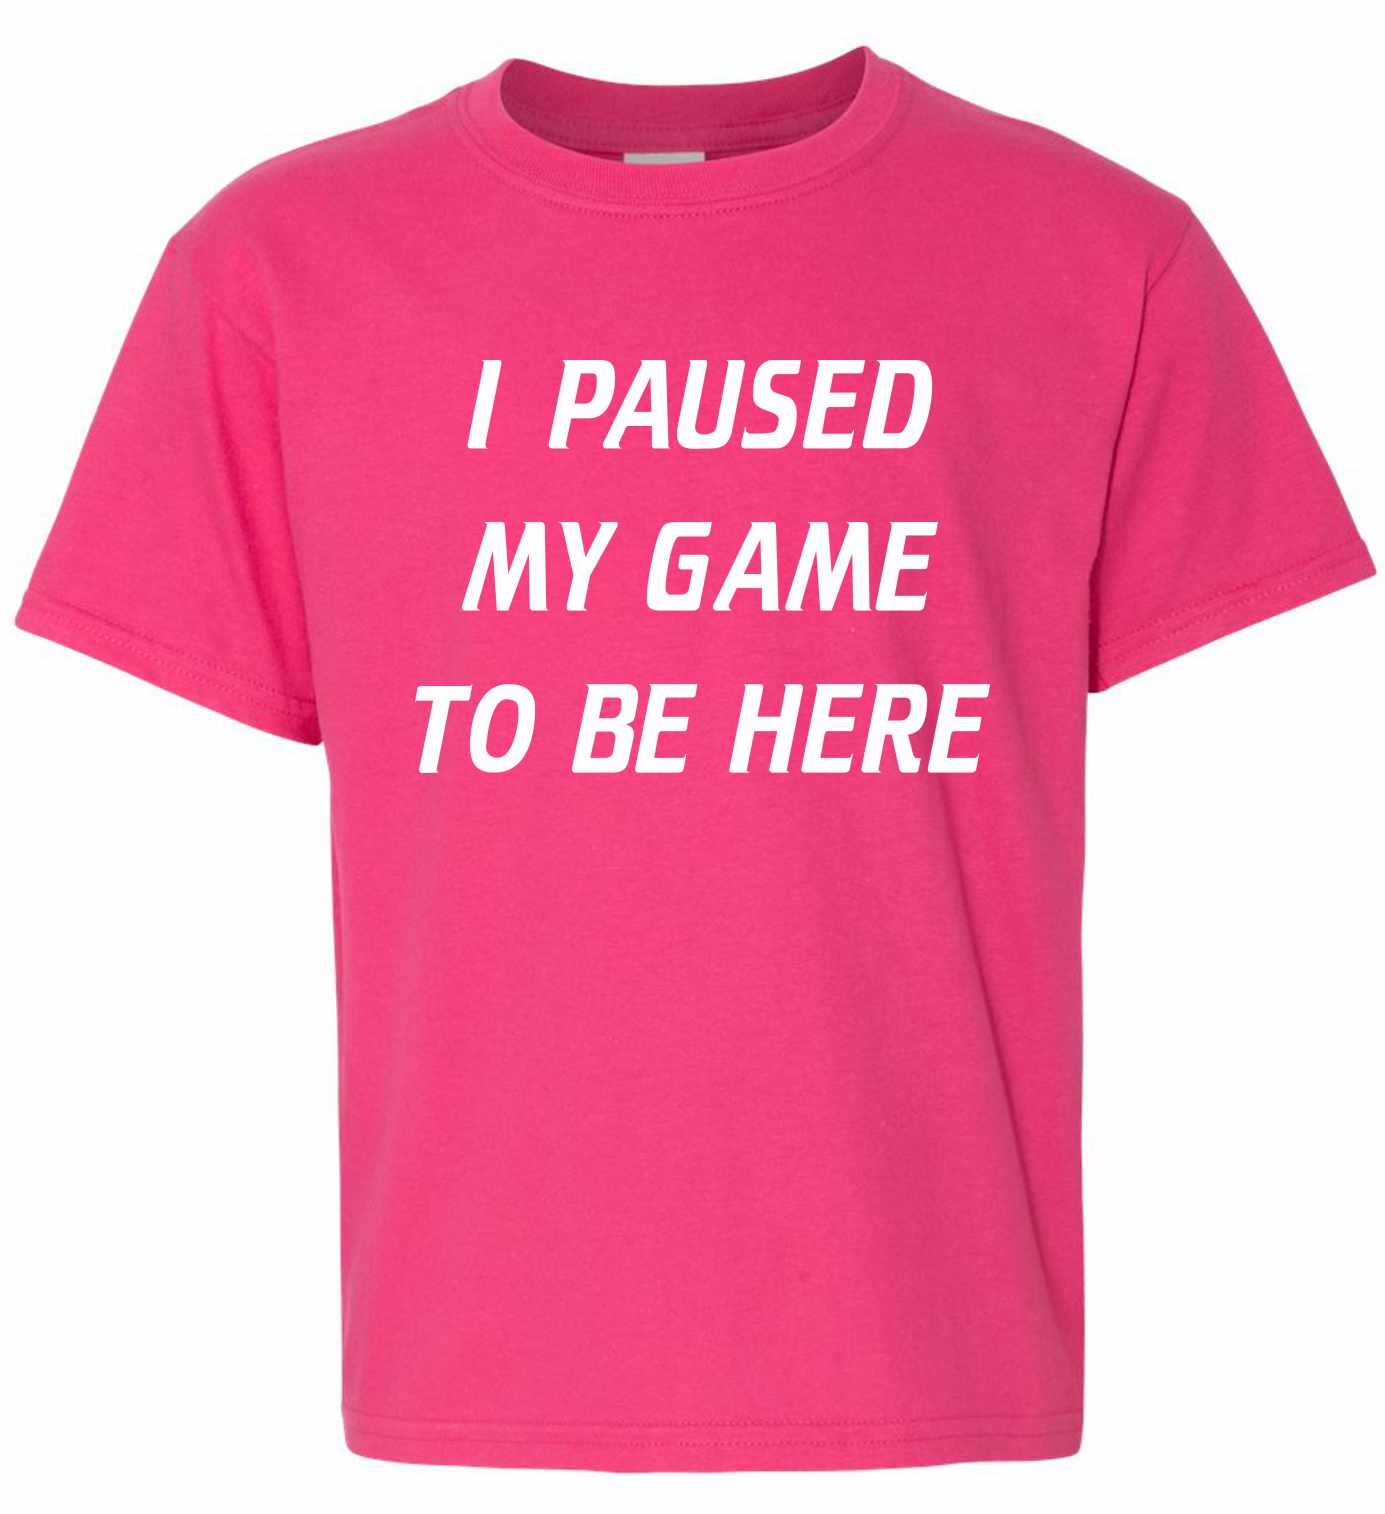 I Paused My Game to Be Here on Kids T-Shirt (#970-201)